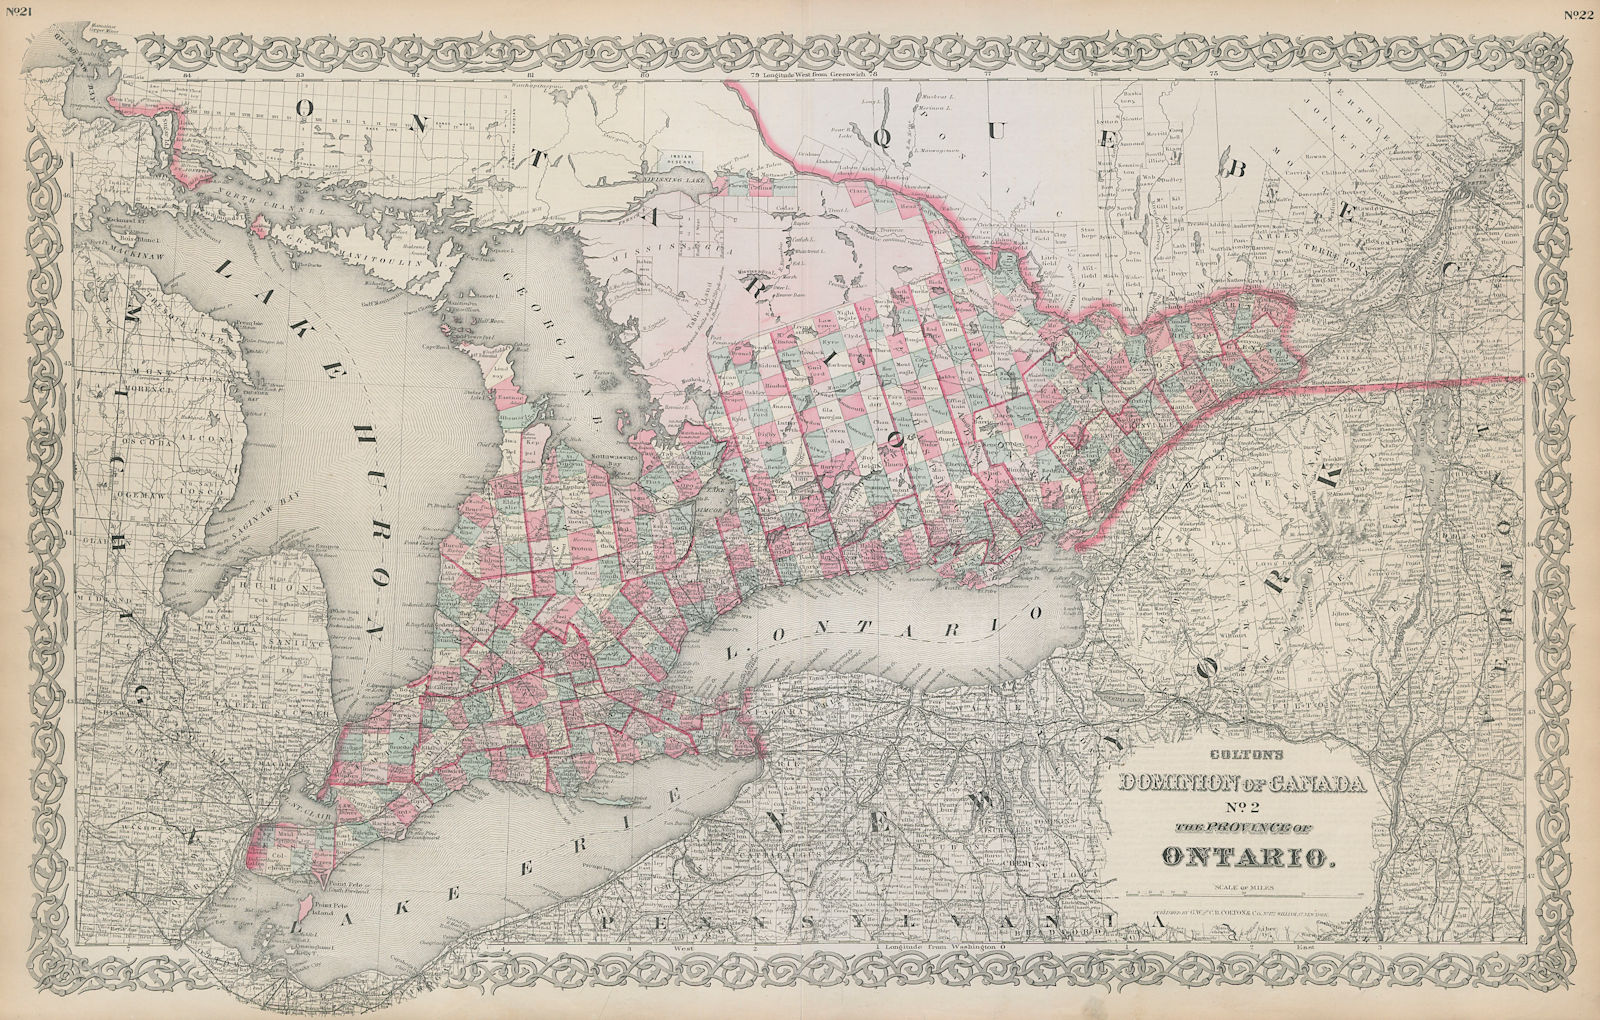 Colton's Dominion of Canada No. 2 Ontario. Great Lakes. Upper New York 1869 map